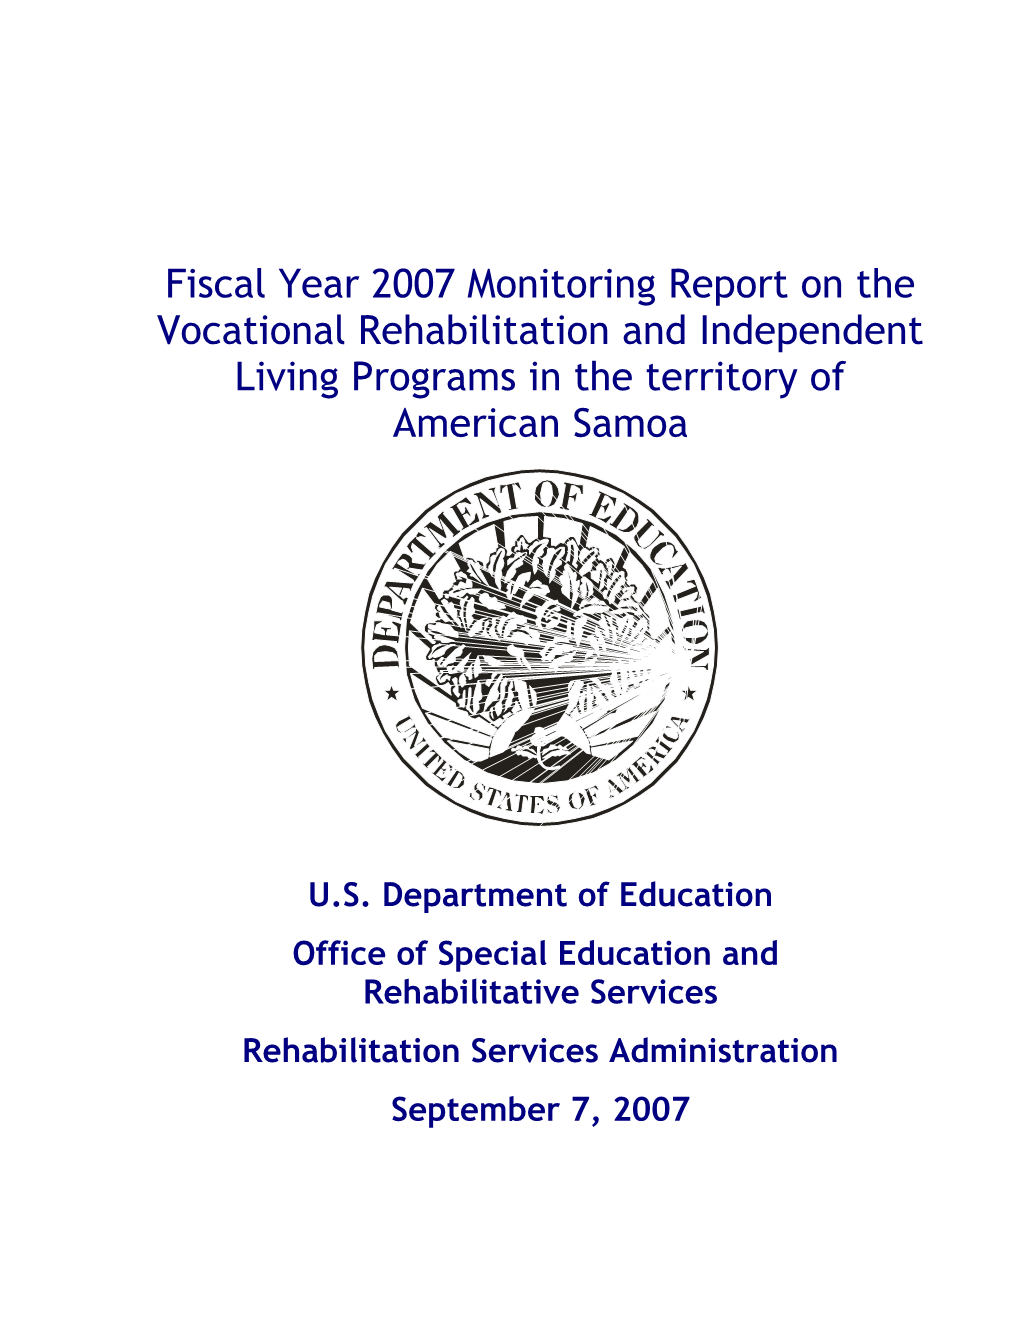 Iscal Year 2007 Monitoring Report on the Vocational Rehabilitation and Independent Living